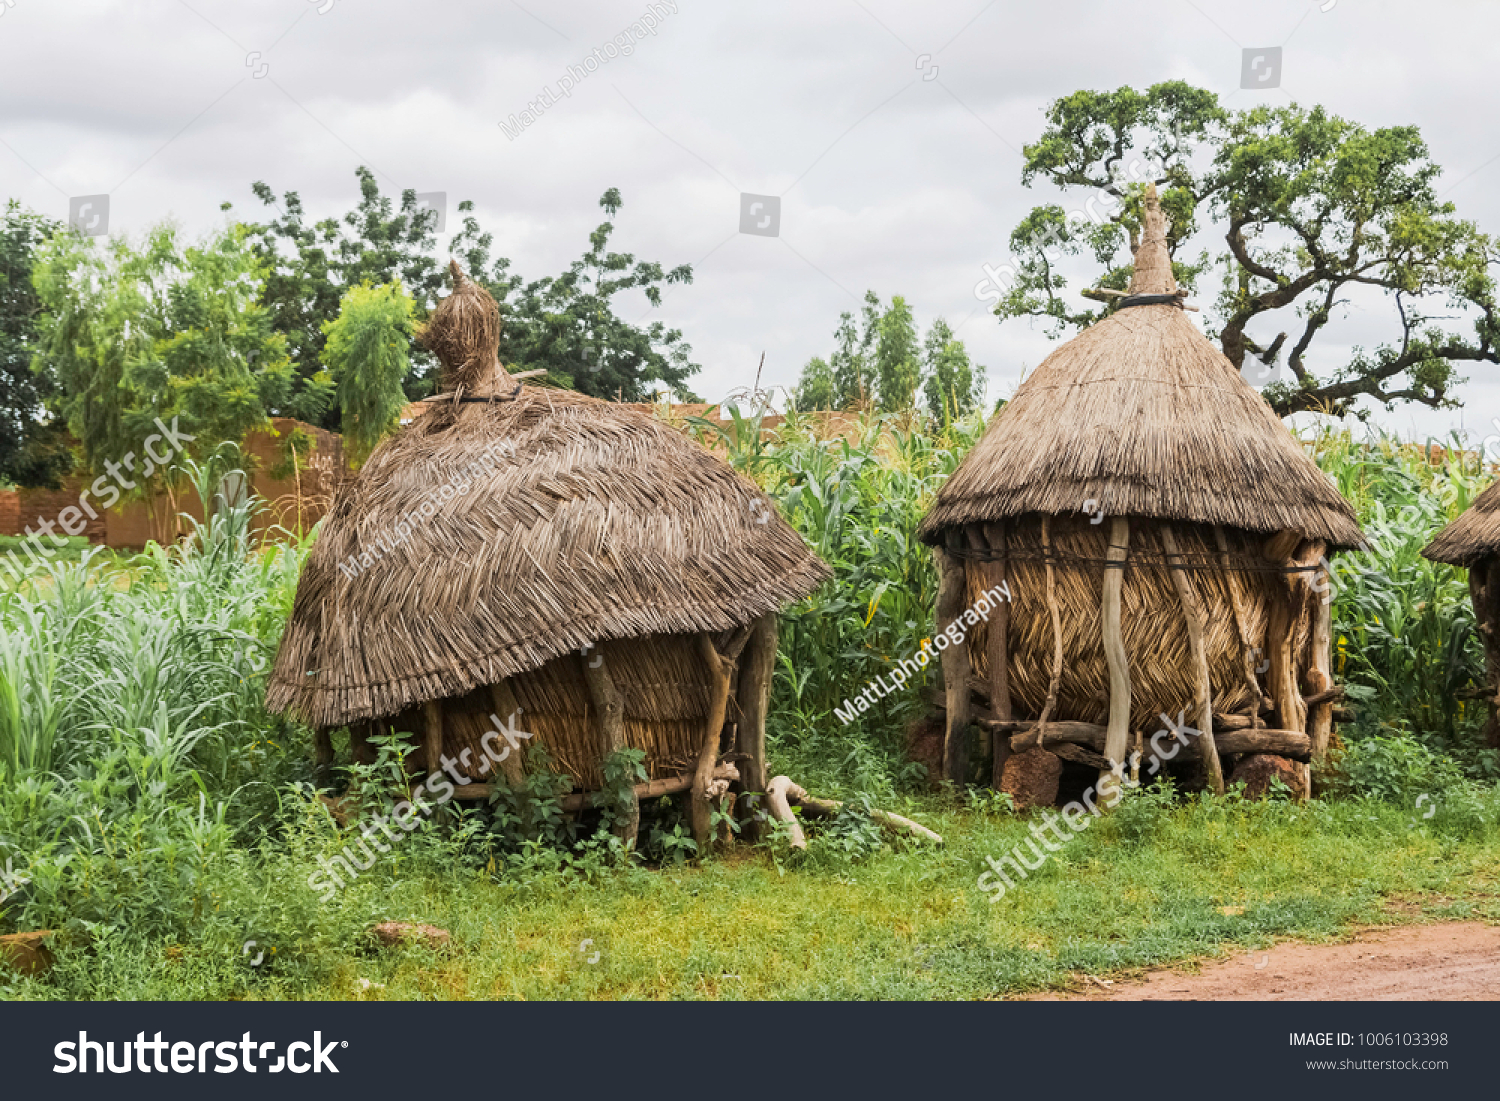 Two traditional african granaries made of wood and straw, Ouagadougou, Burkina Faso. #1006103398